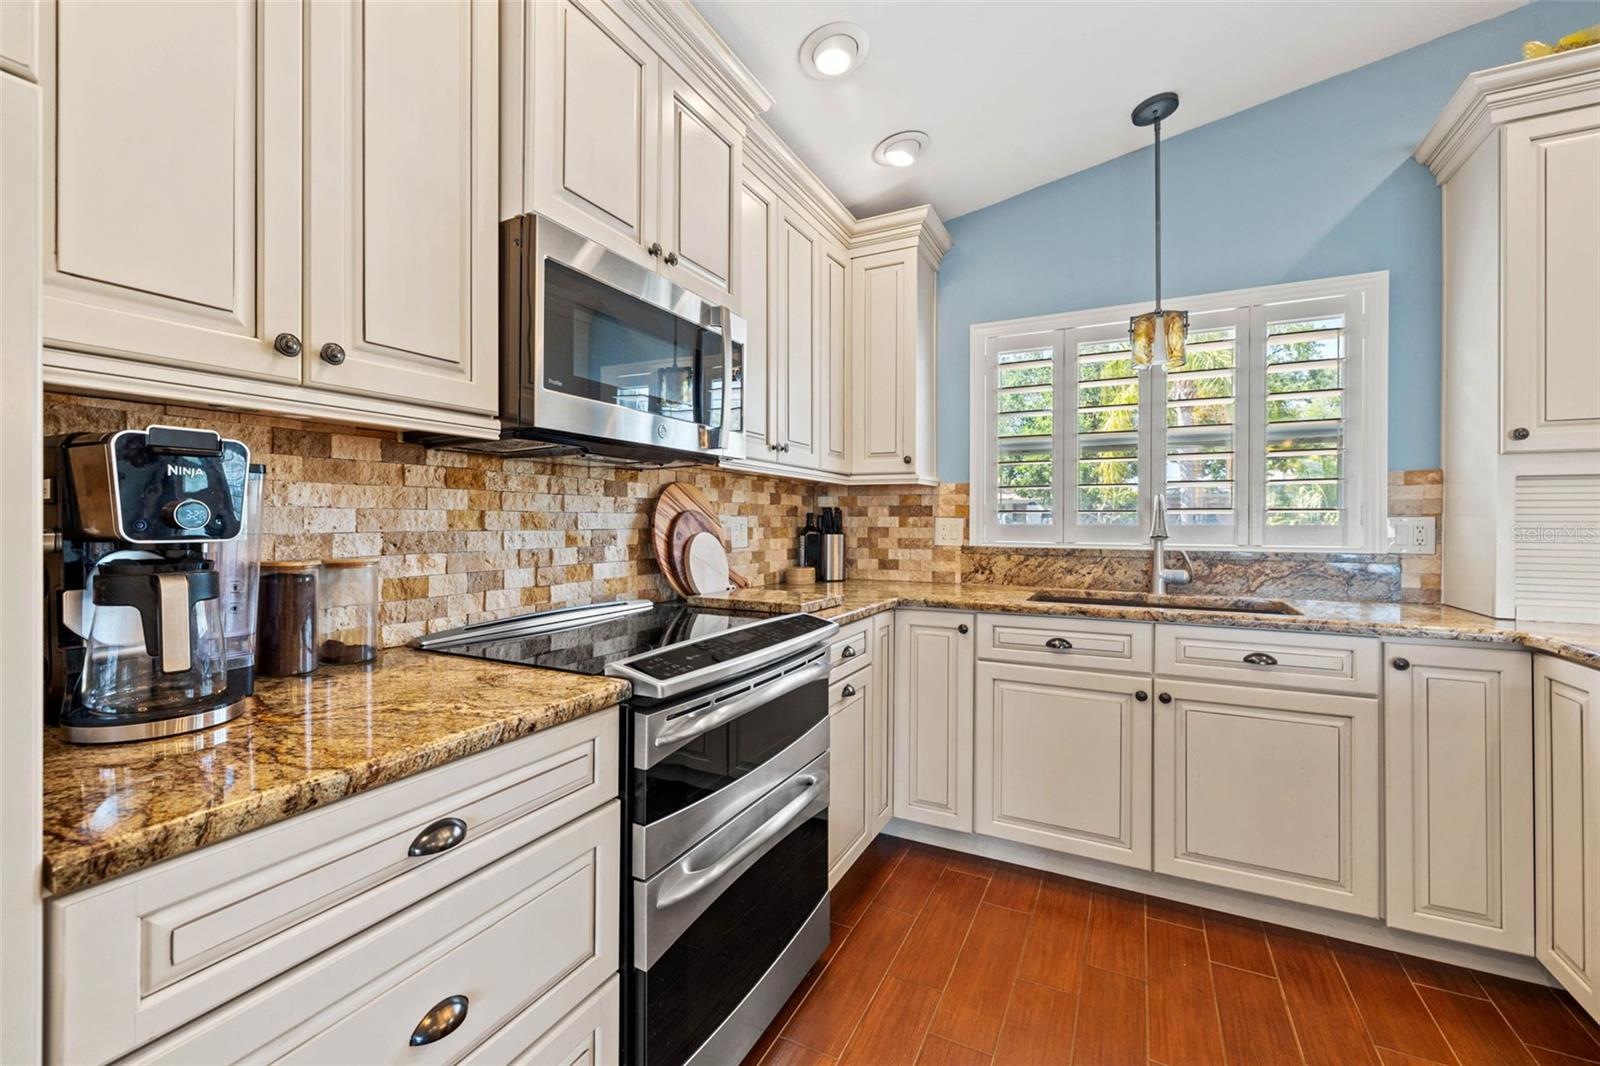 Custom KraftMaid cabinetry, stone backsplash, stainless appliances and with air fryer in the microwave